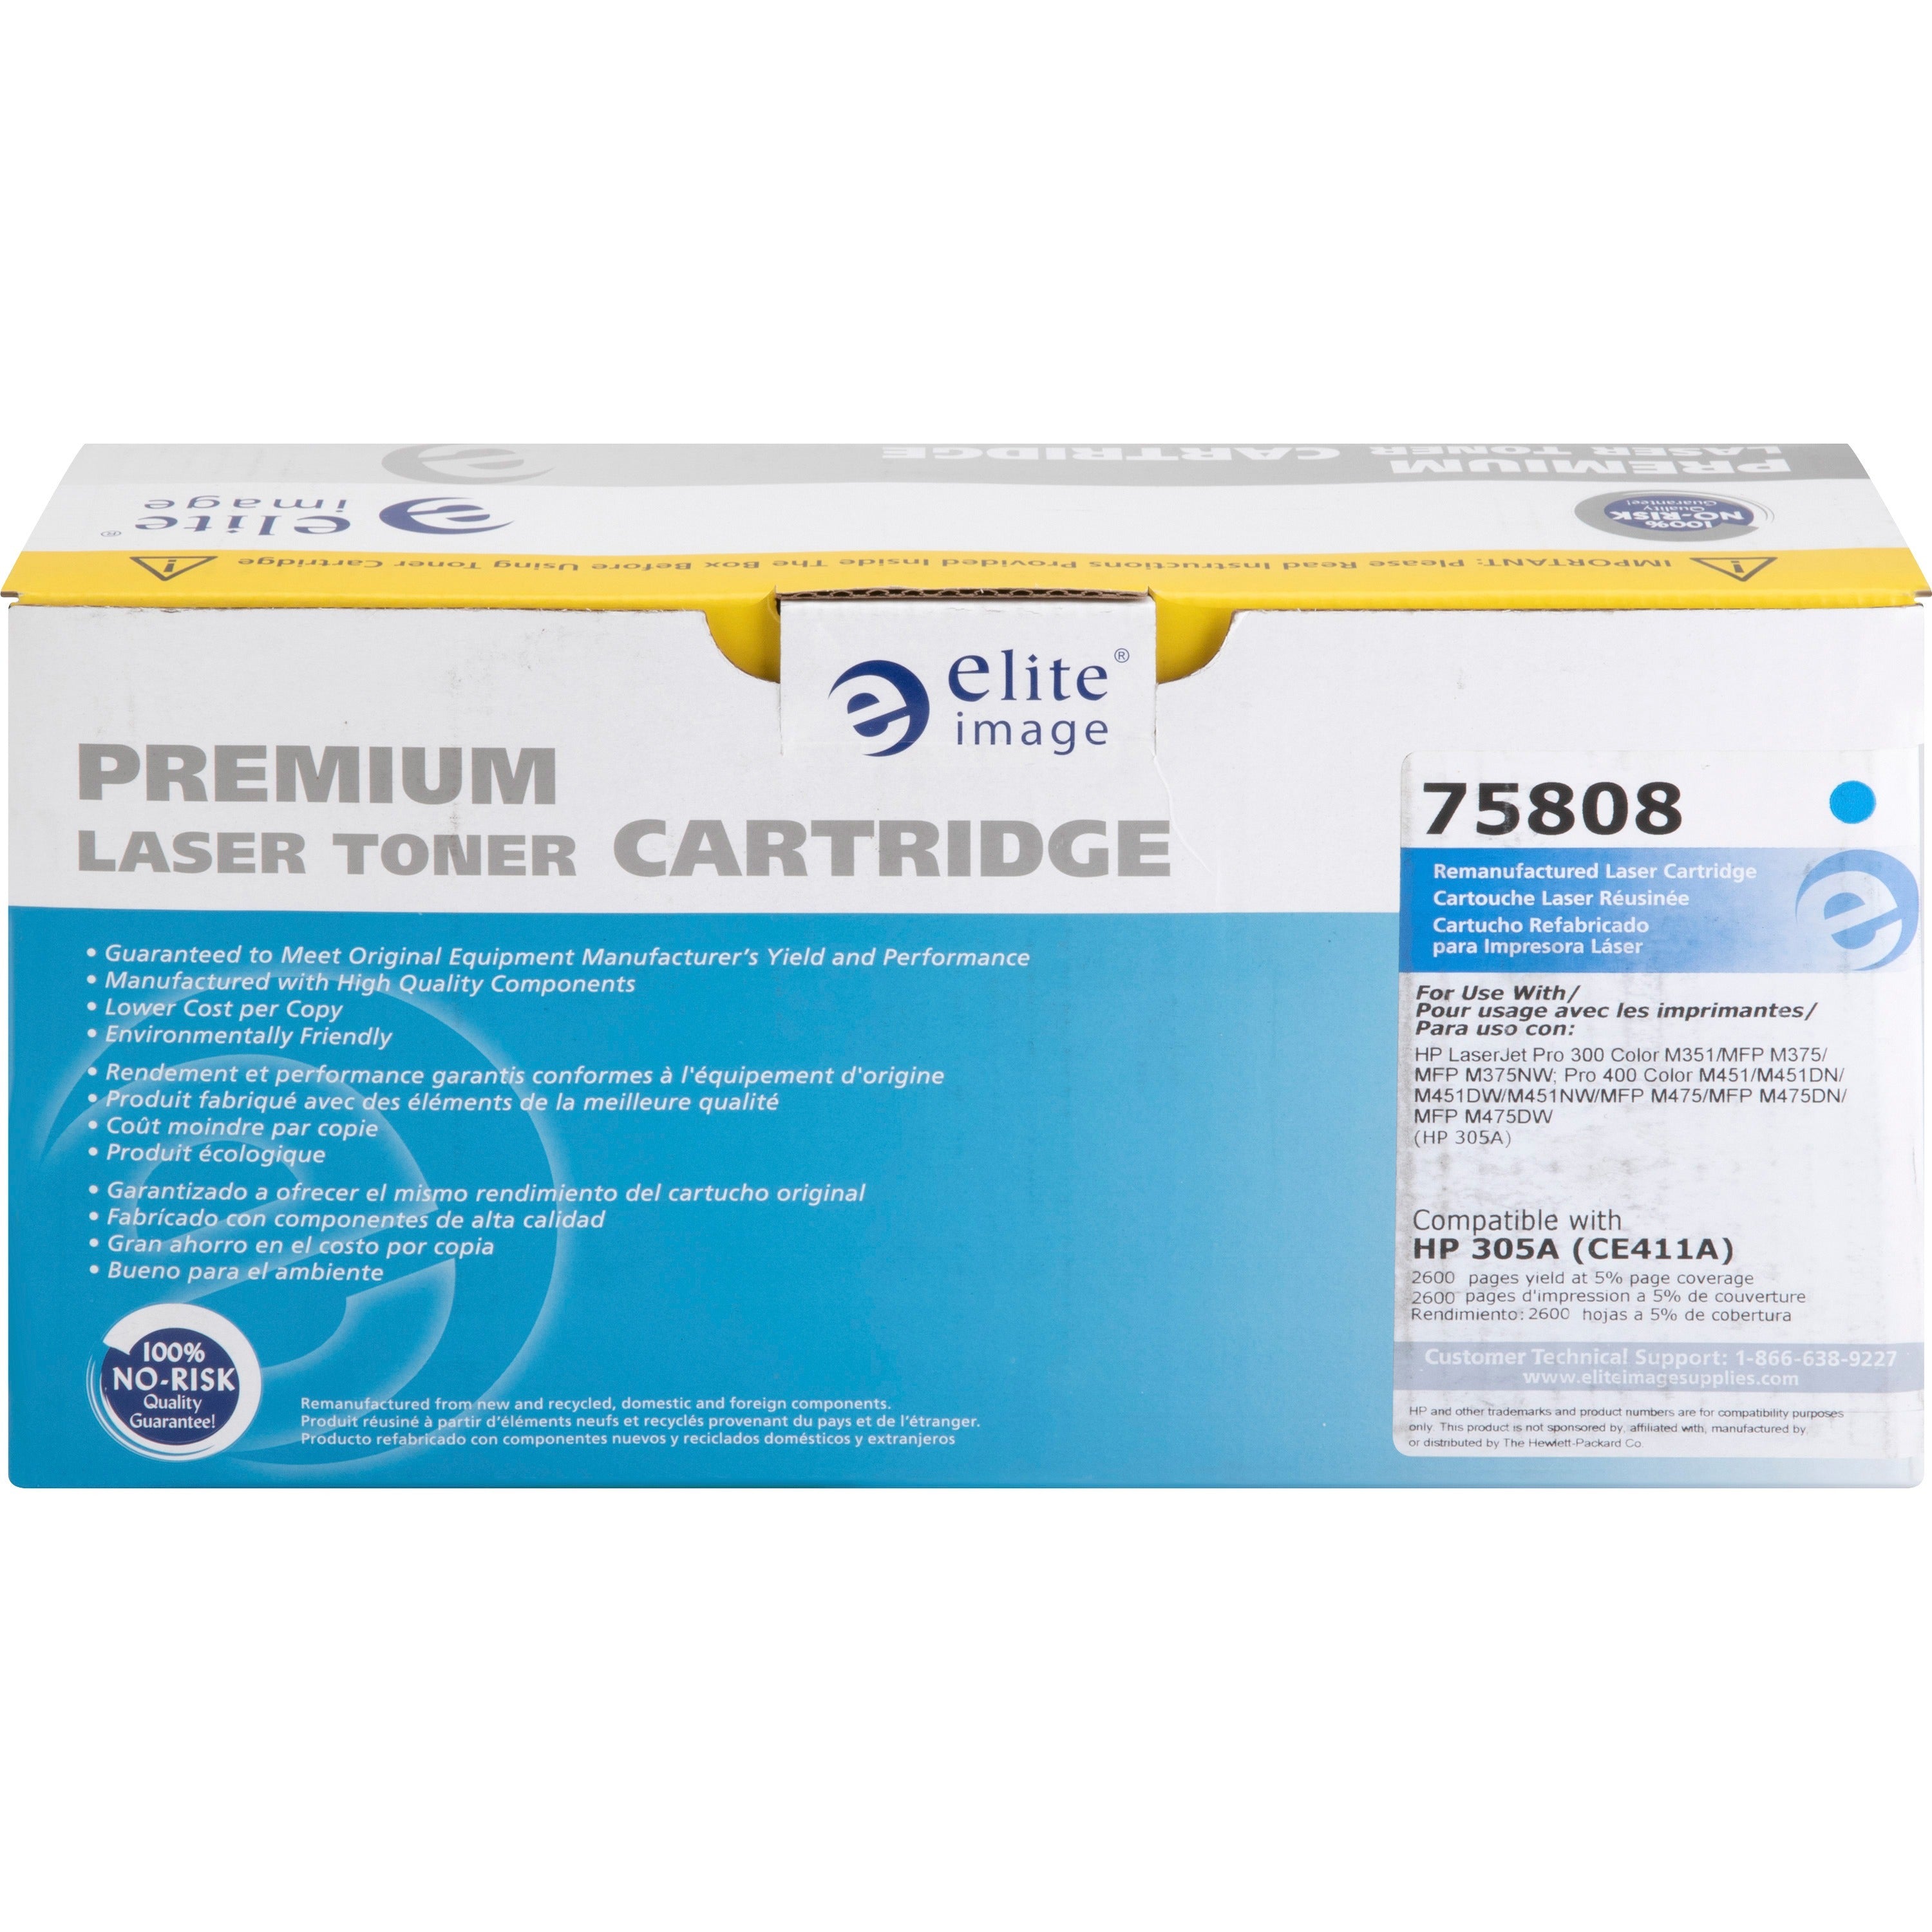 Elite Image Remanufactured Toner Cartridge - Alternative for HP 305A (CE411A) - Laser - 2600 Pages - Cyan - 1 Each - 2